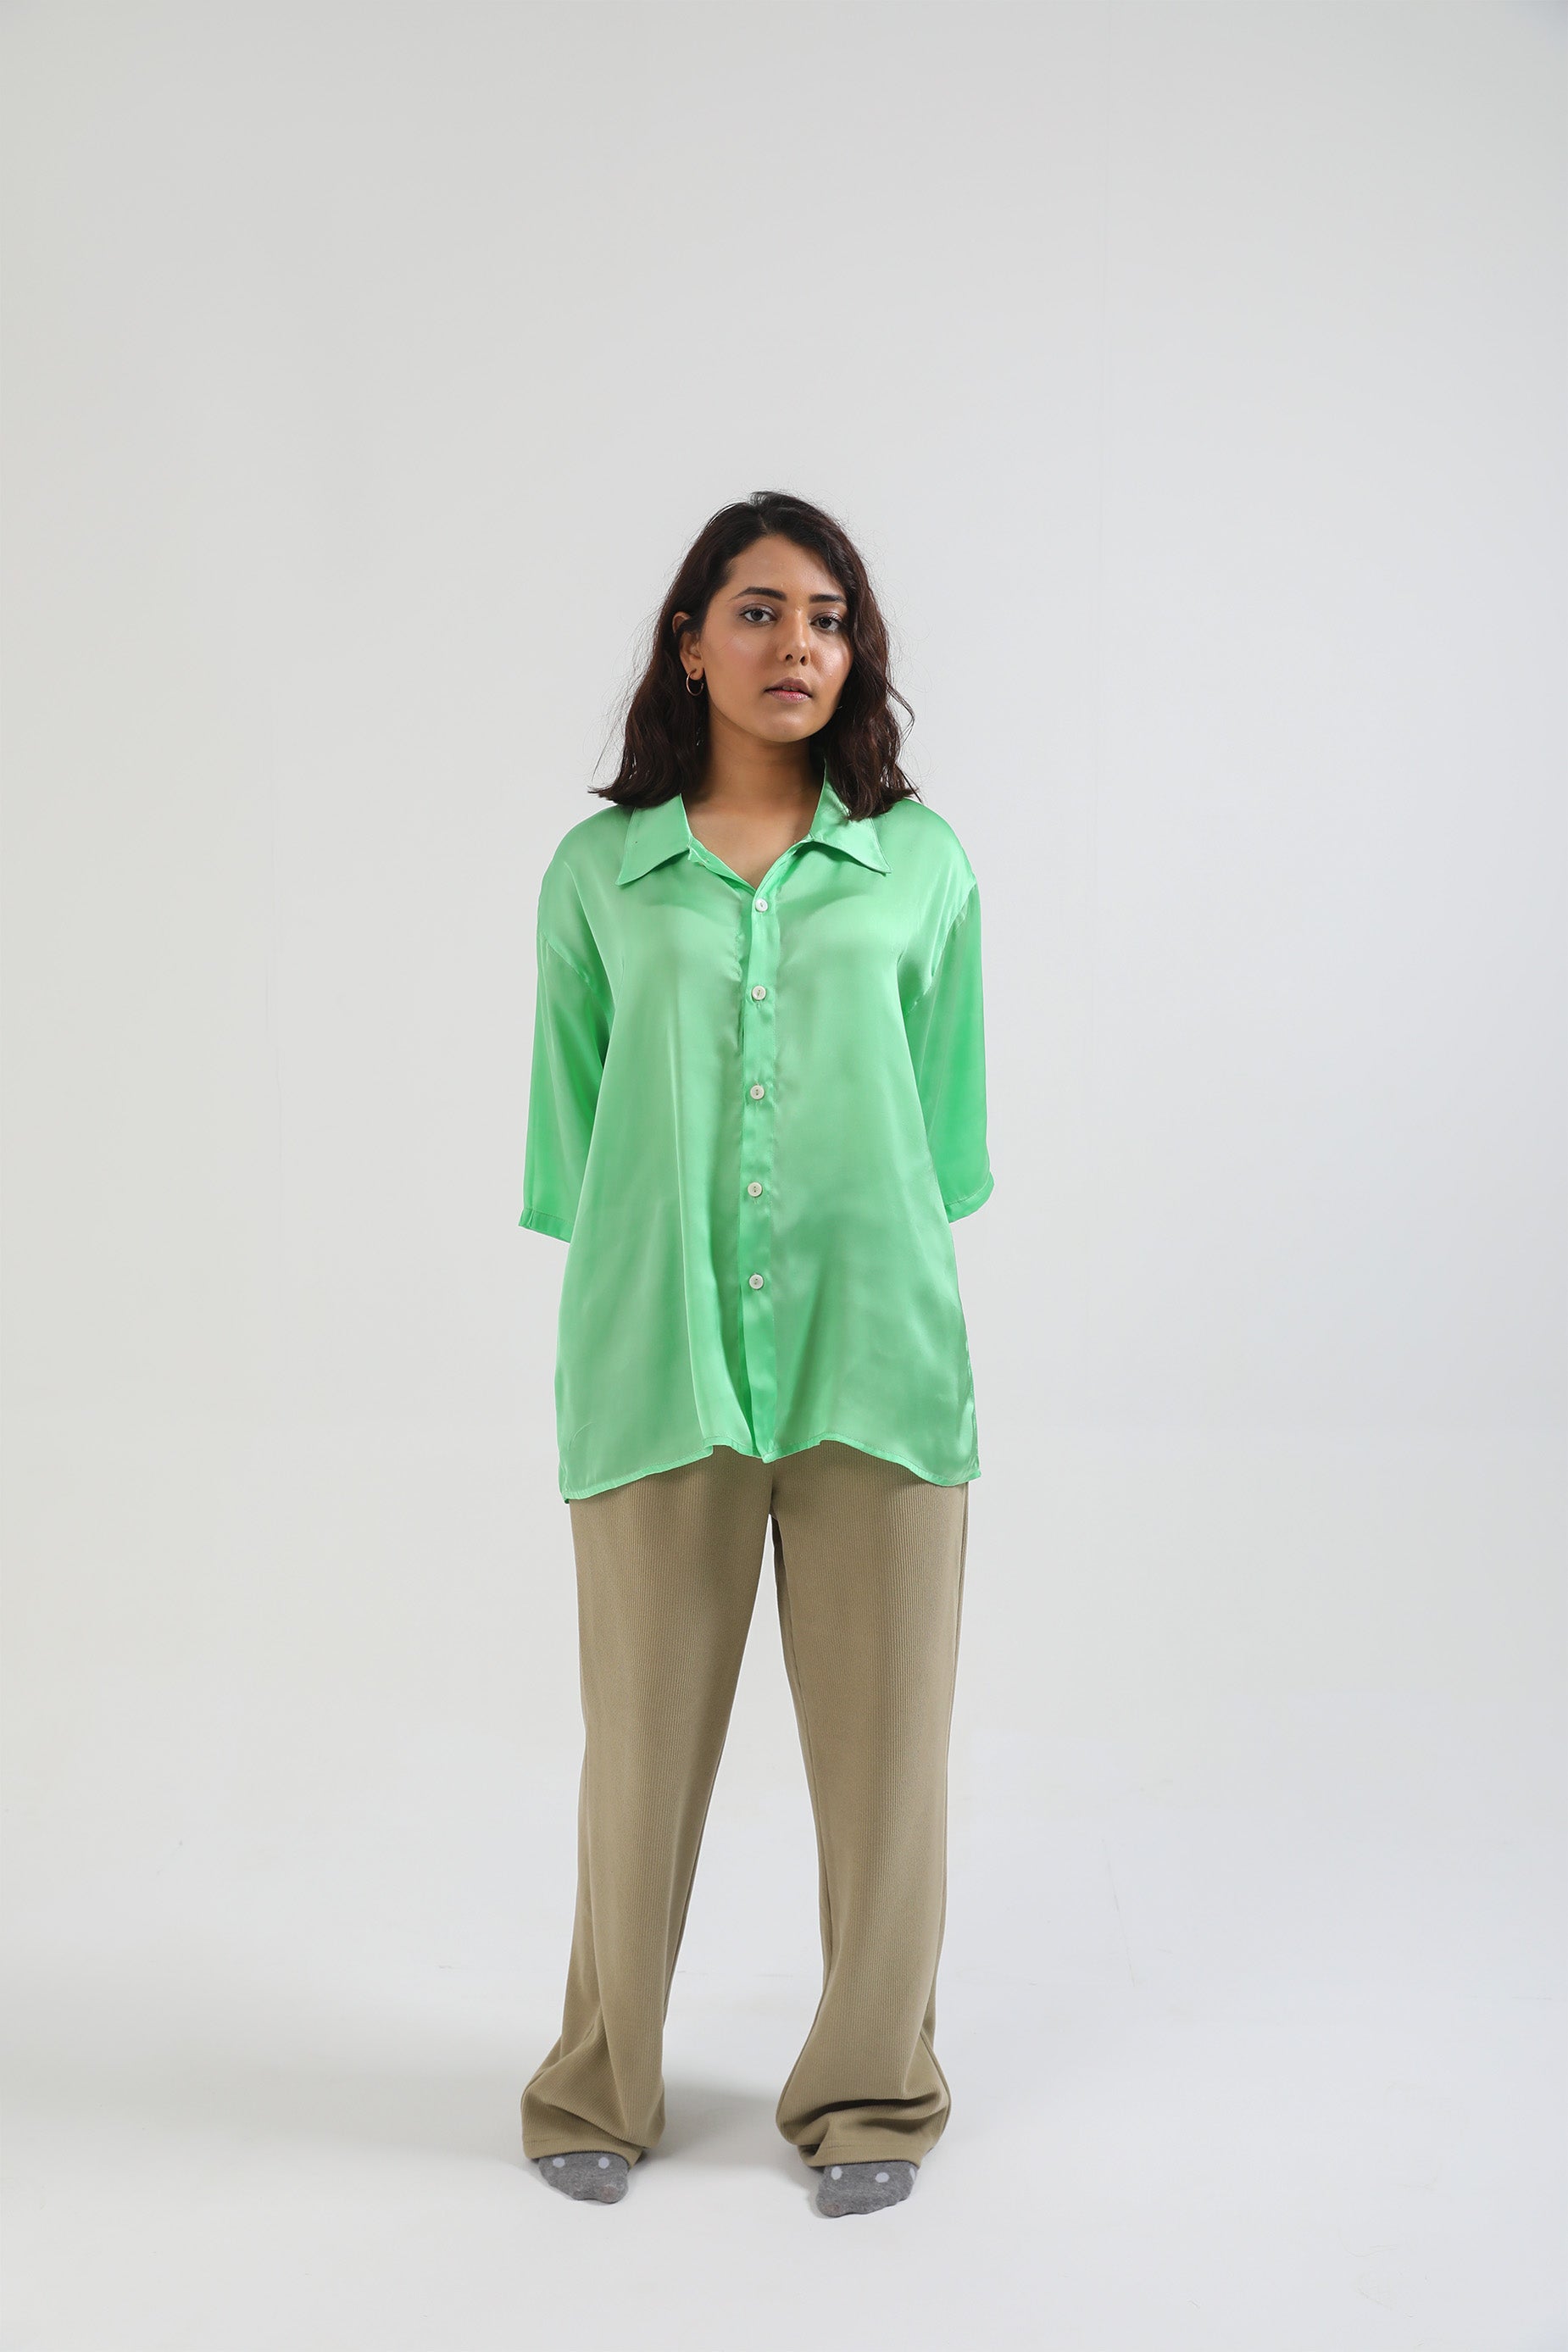 SOLID COLOR BUTTON UP SHIRT